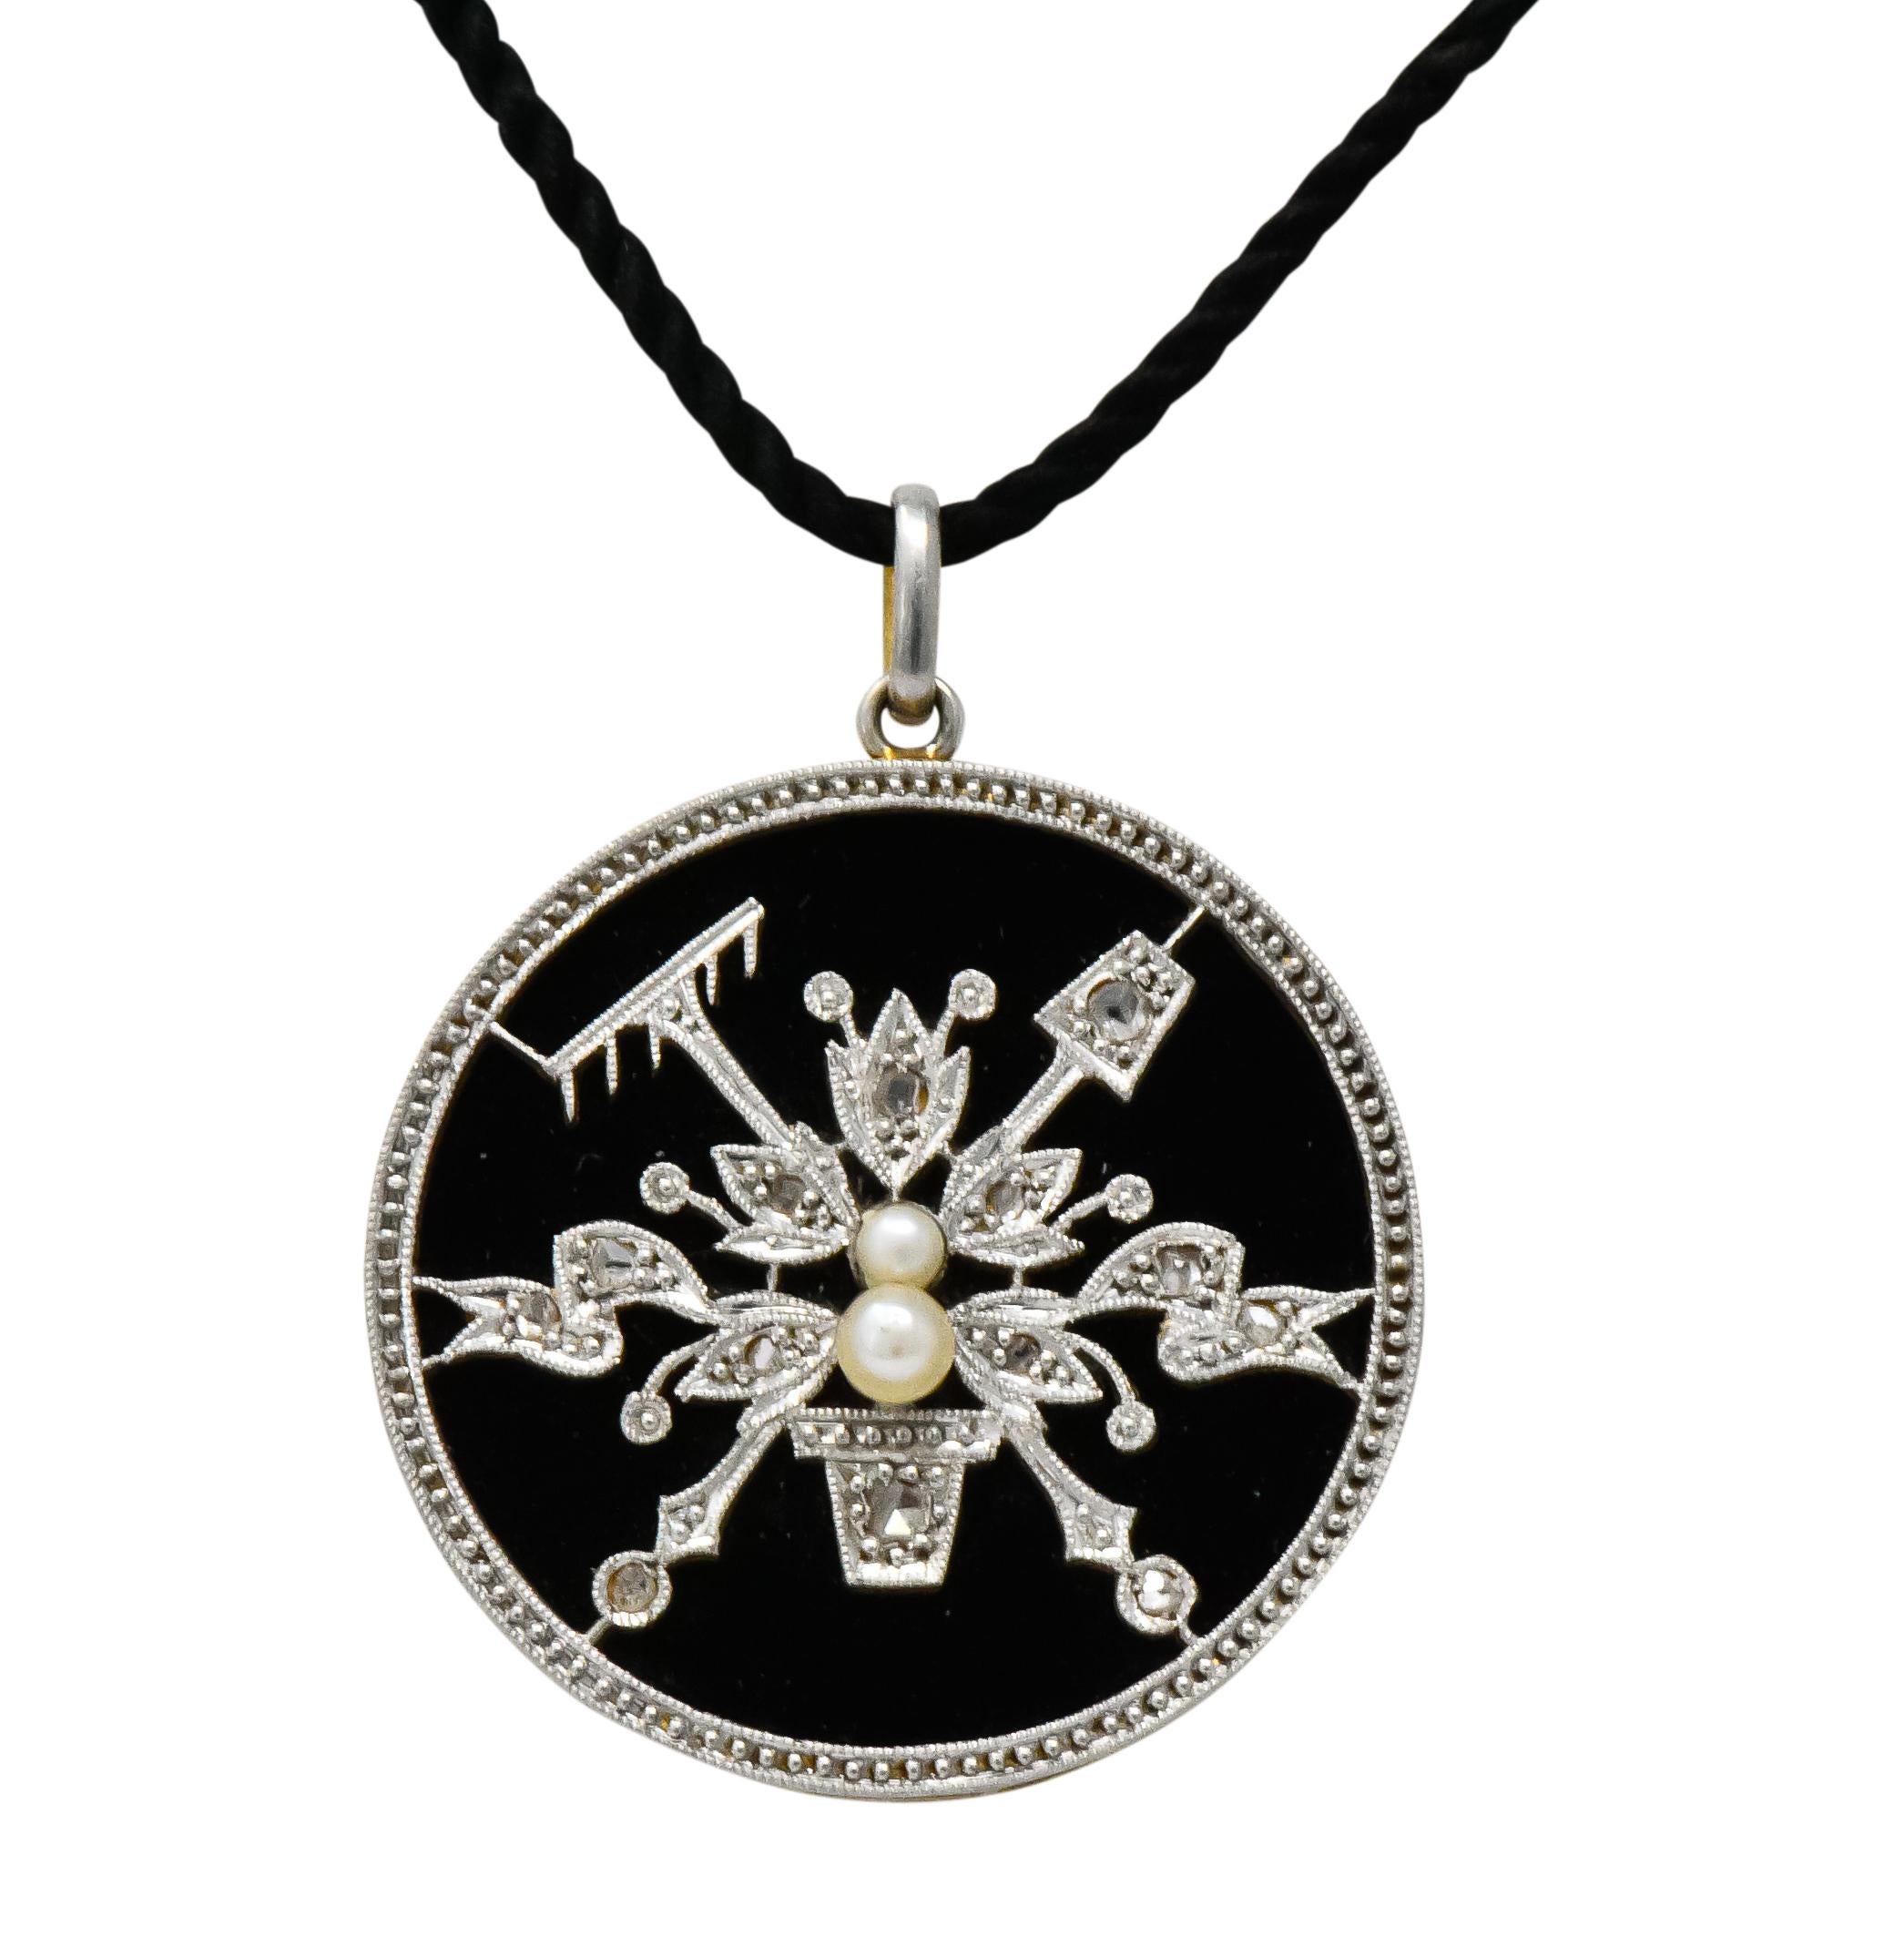 Pendant comprised of onyx inset in platinum-topped, millegrained, circular frame depicting flowers, rake and spade

Bead set through out with rose cut diamonds and accented by two freshwater natural pearls

With platinum-topped bale on cotton cord